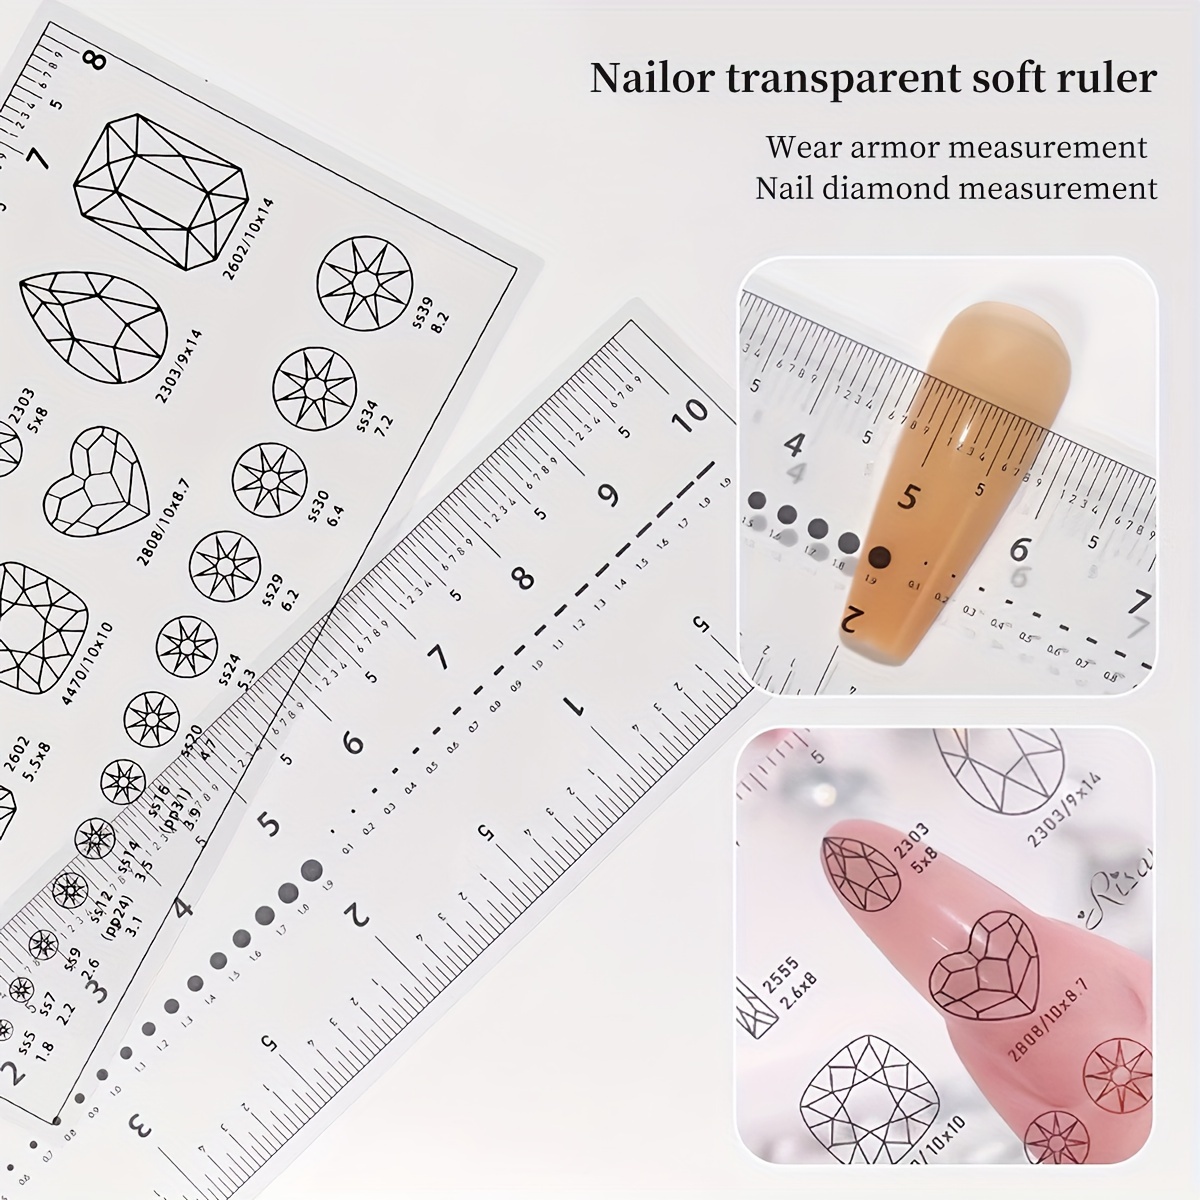 

2-pack Bendable Transparent Nail Ruler, Ultra-thin Soft Ruler For Precise Measurement Of Nails And Nail Art Accessories, Multi-functional Clear Scale Card - Unscented, Tools & Accessories.